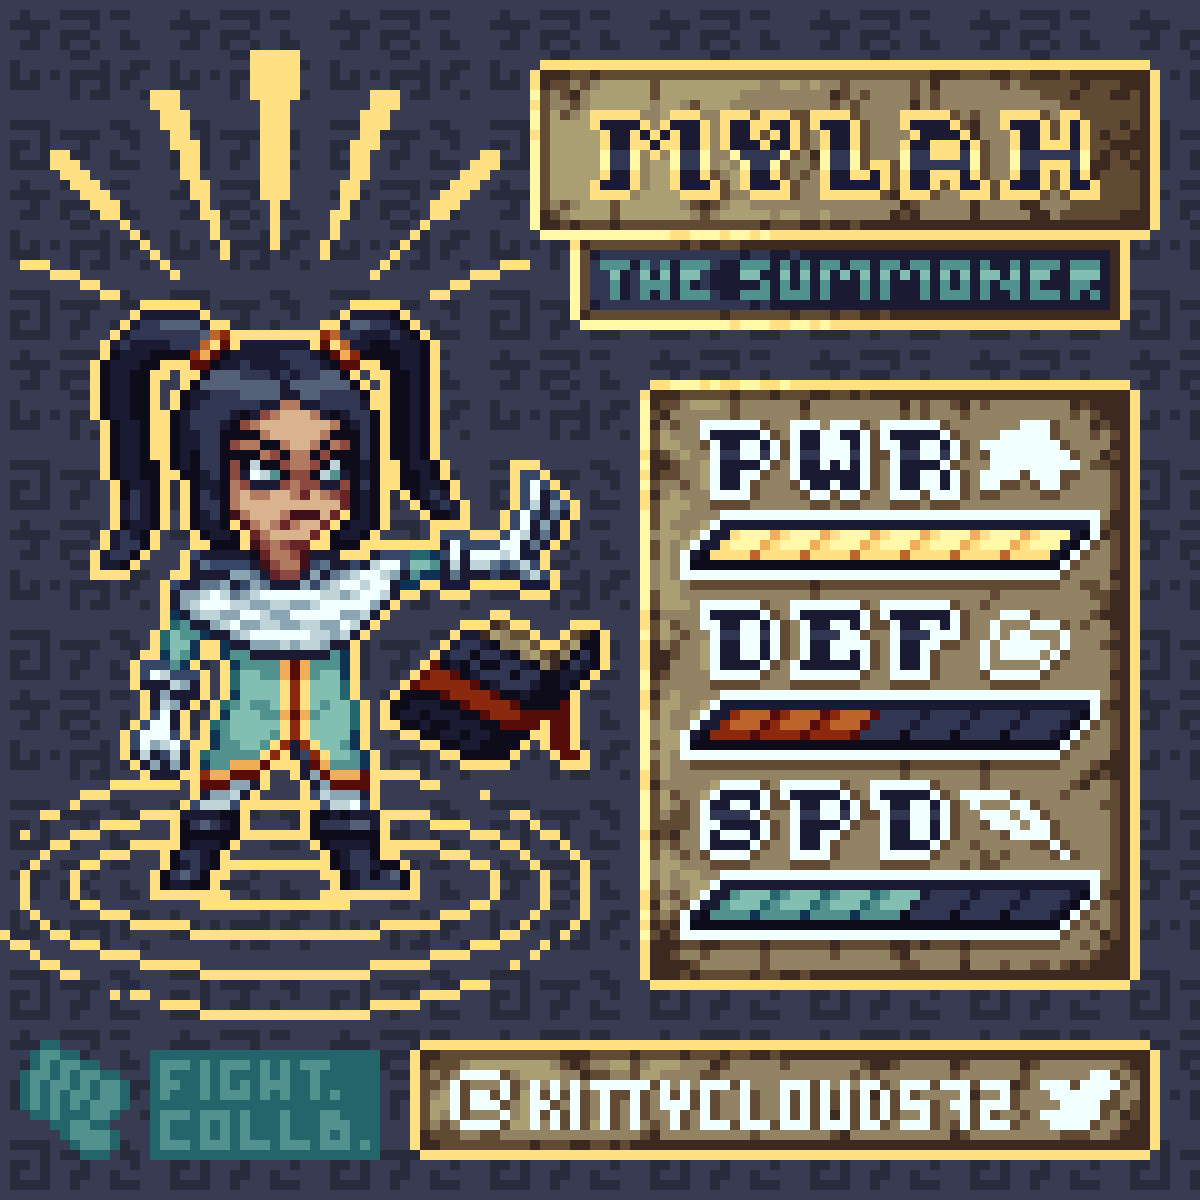 ✨MYLAH THE SUMMONER ENTERS THE BATTLE ✨
@batfeula Thank you so much for letting me participate in this #fightingcollab 💛
#pixelart #pixelartist #pixelartwork #ドット絵